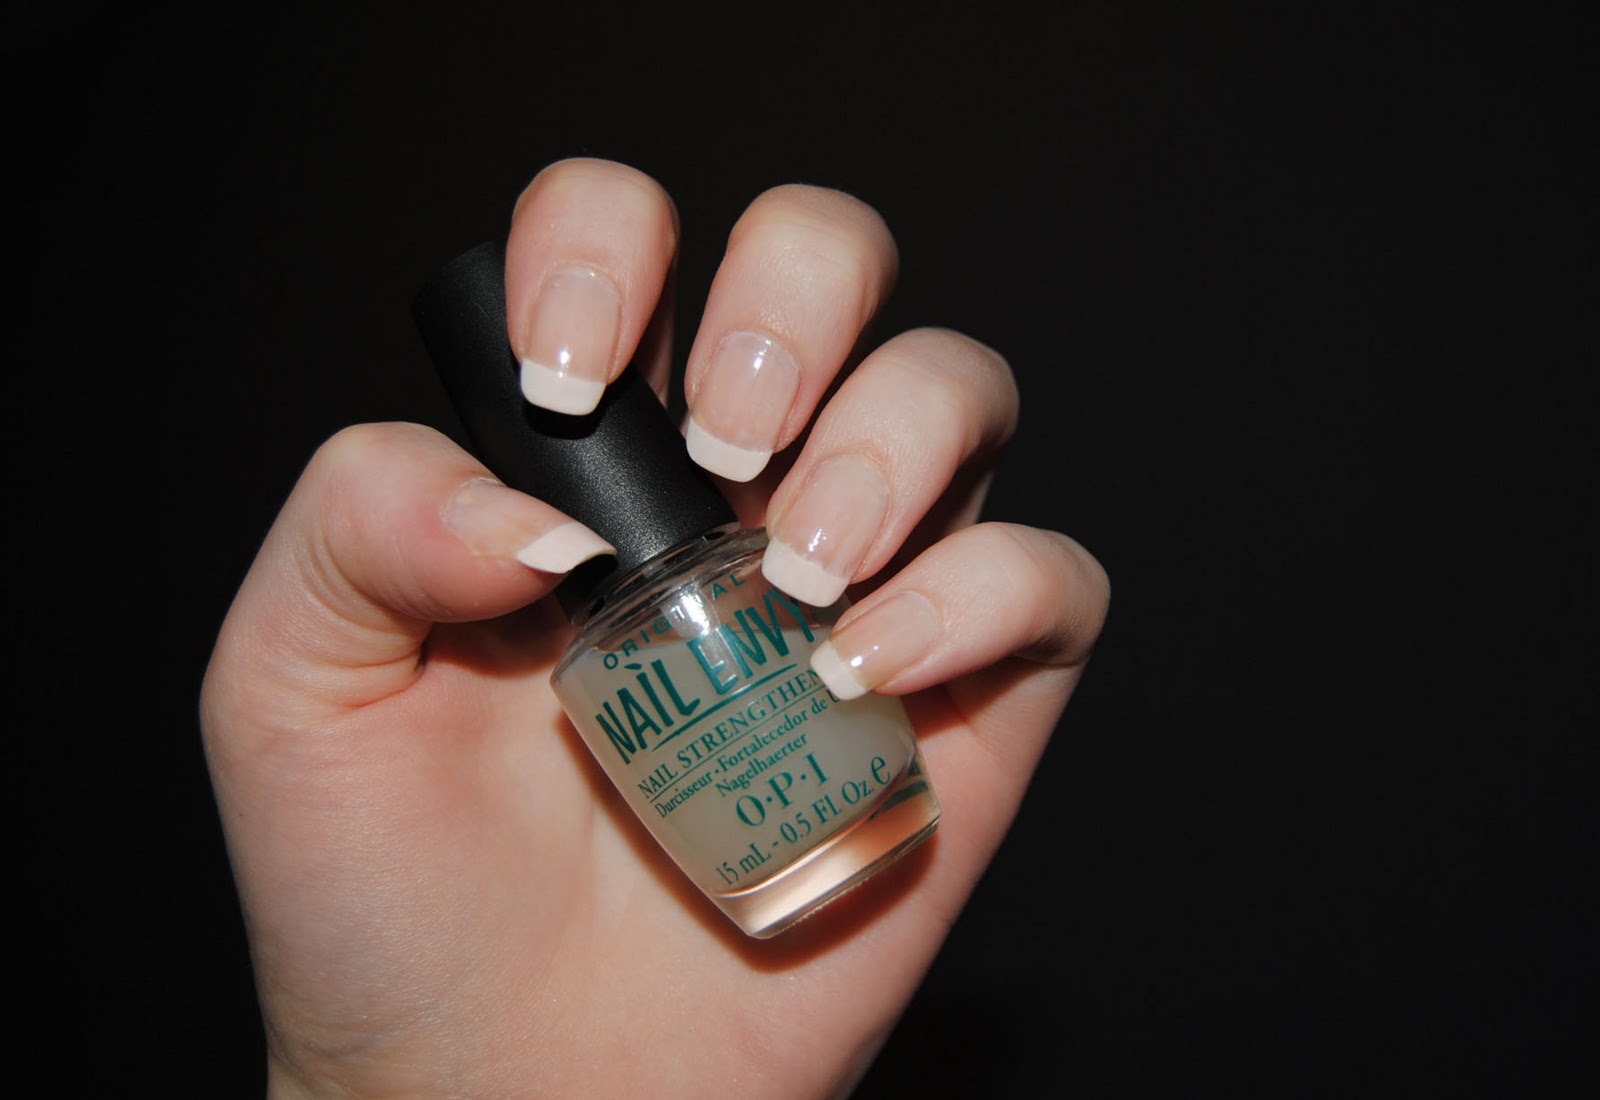 My first OPI purchase came in the form of Nail Envy, a treatment polish